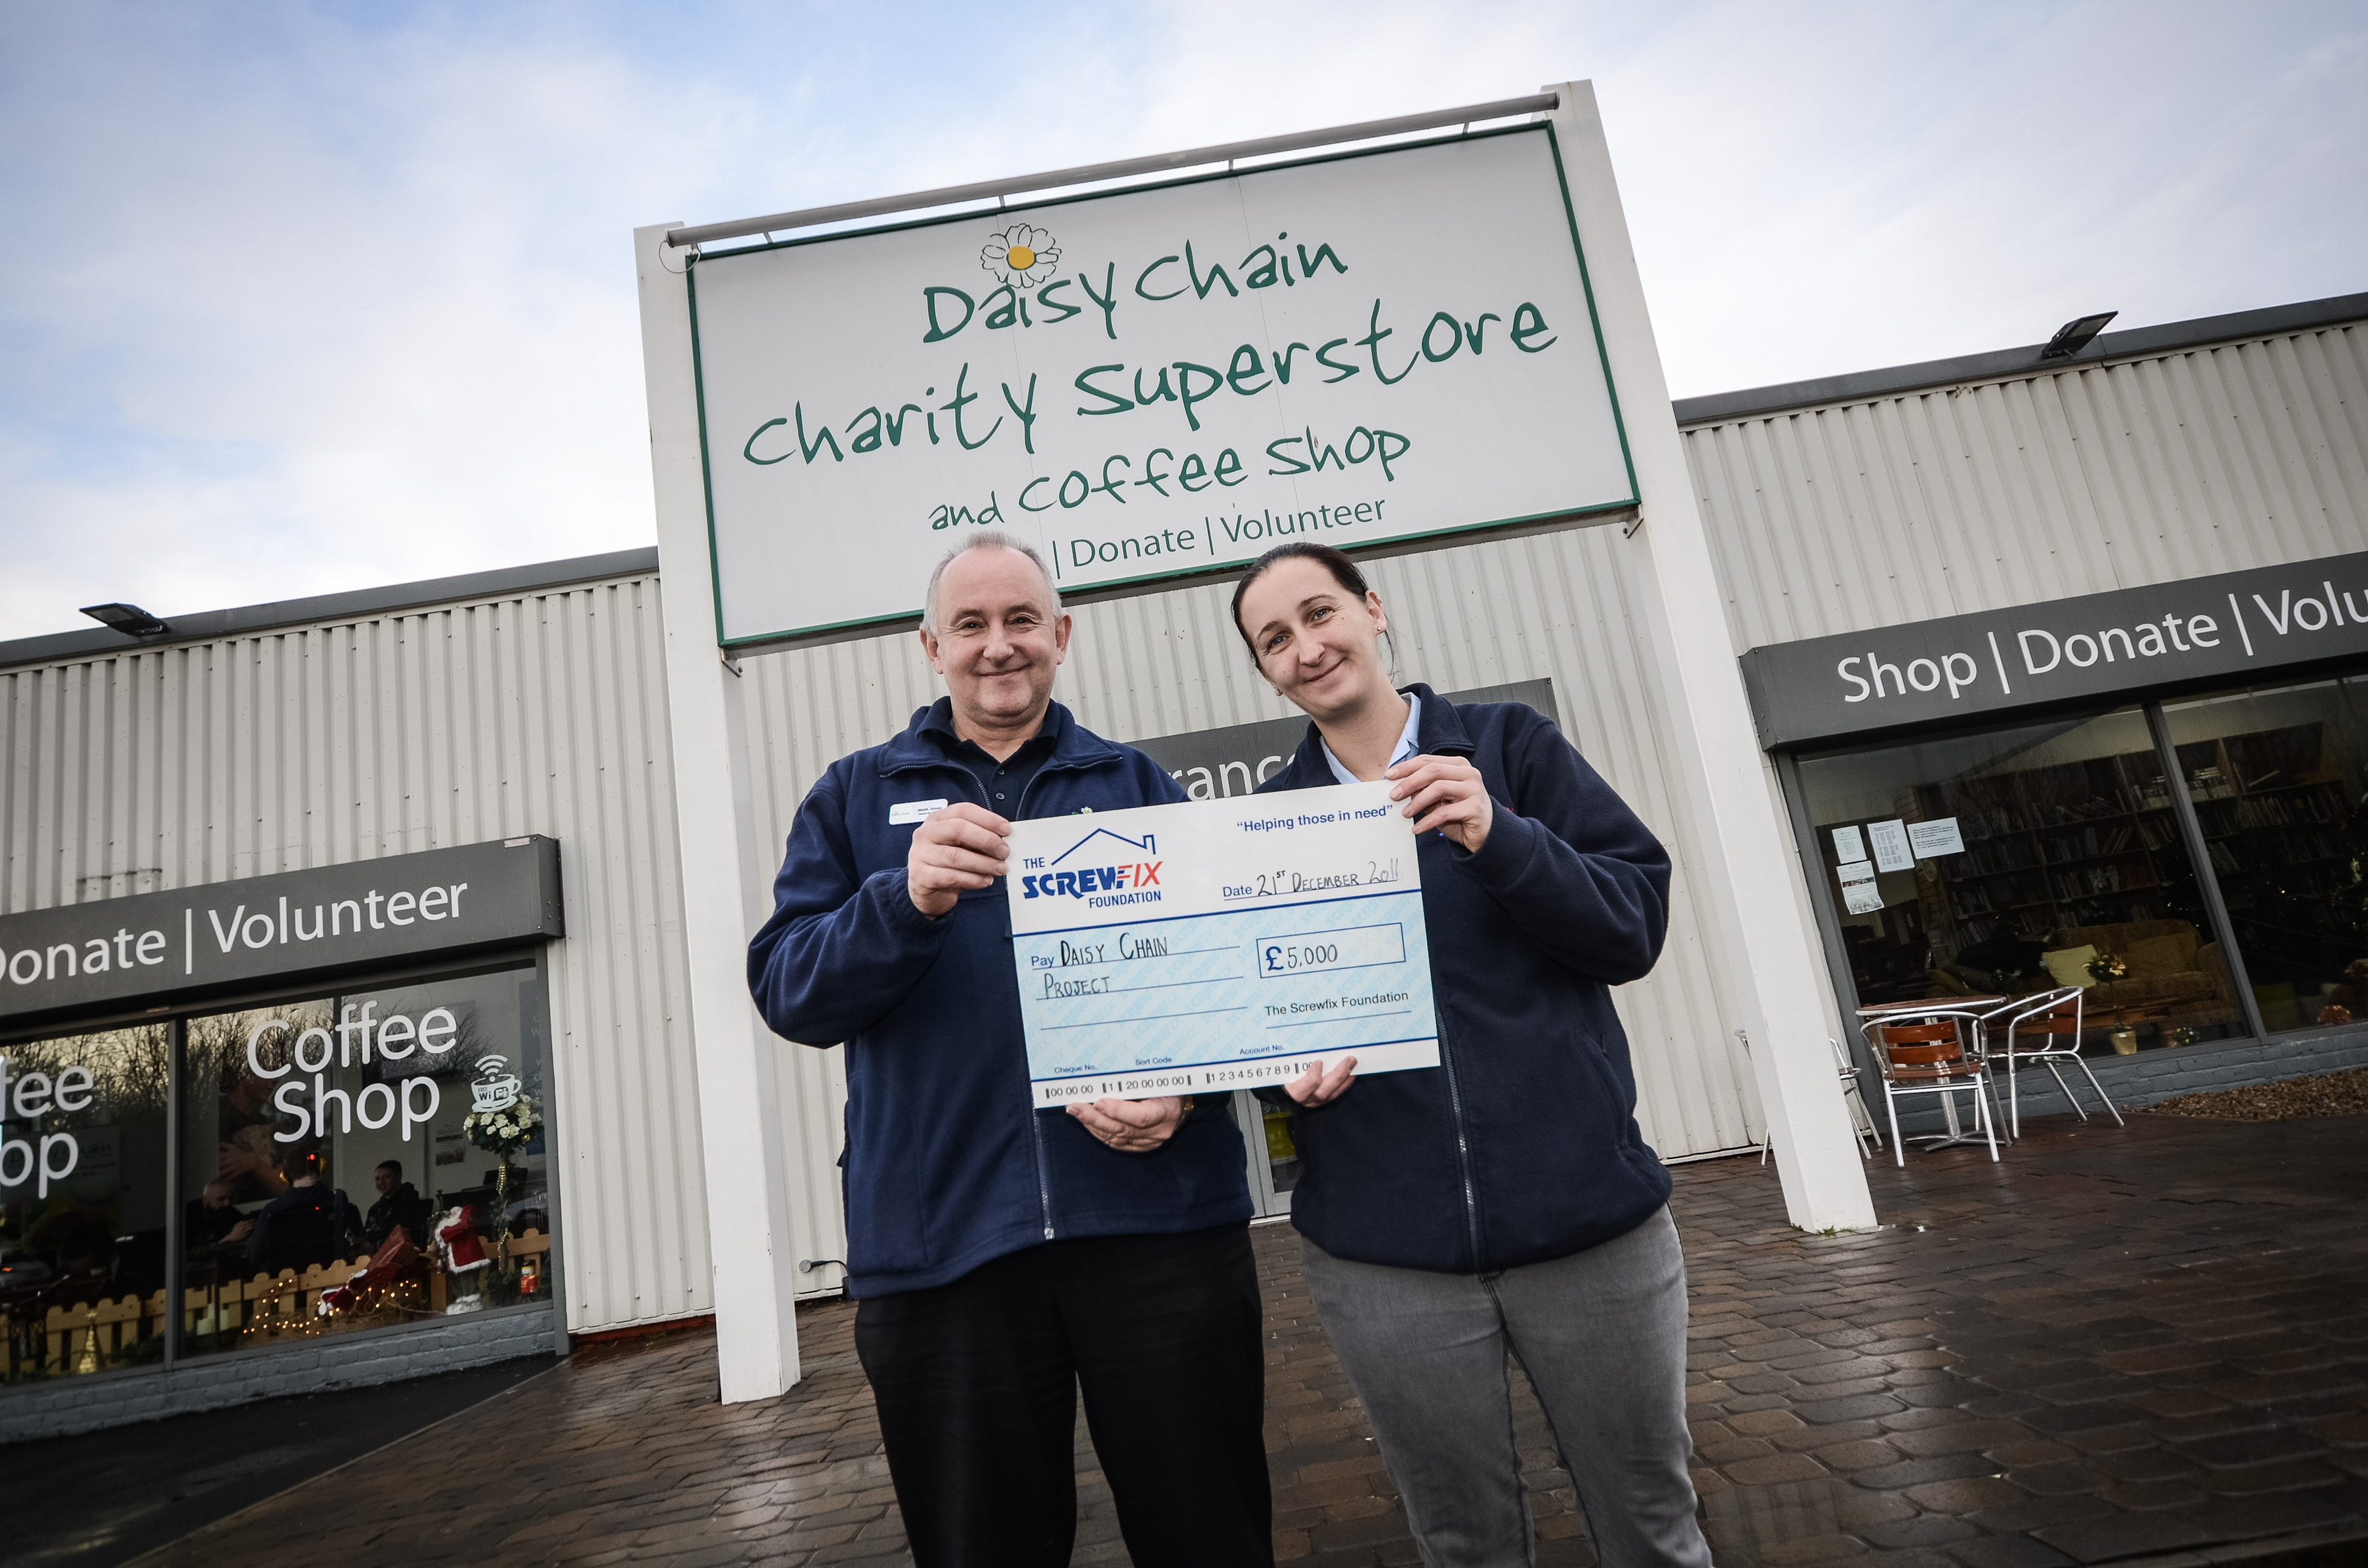 Daisy Chain Project gets a helping hand from The Screwfix Foundation